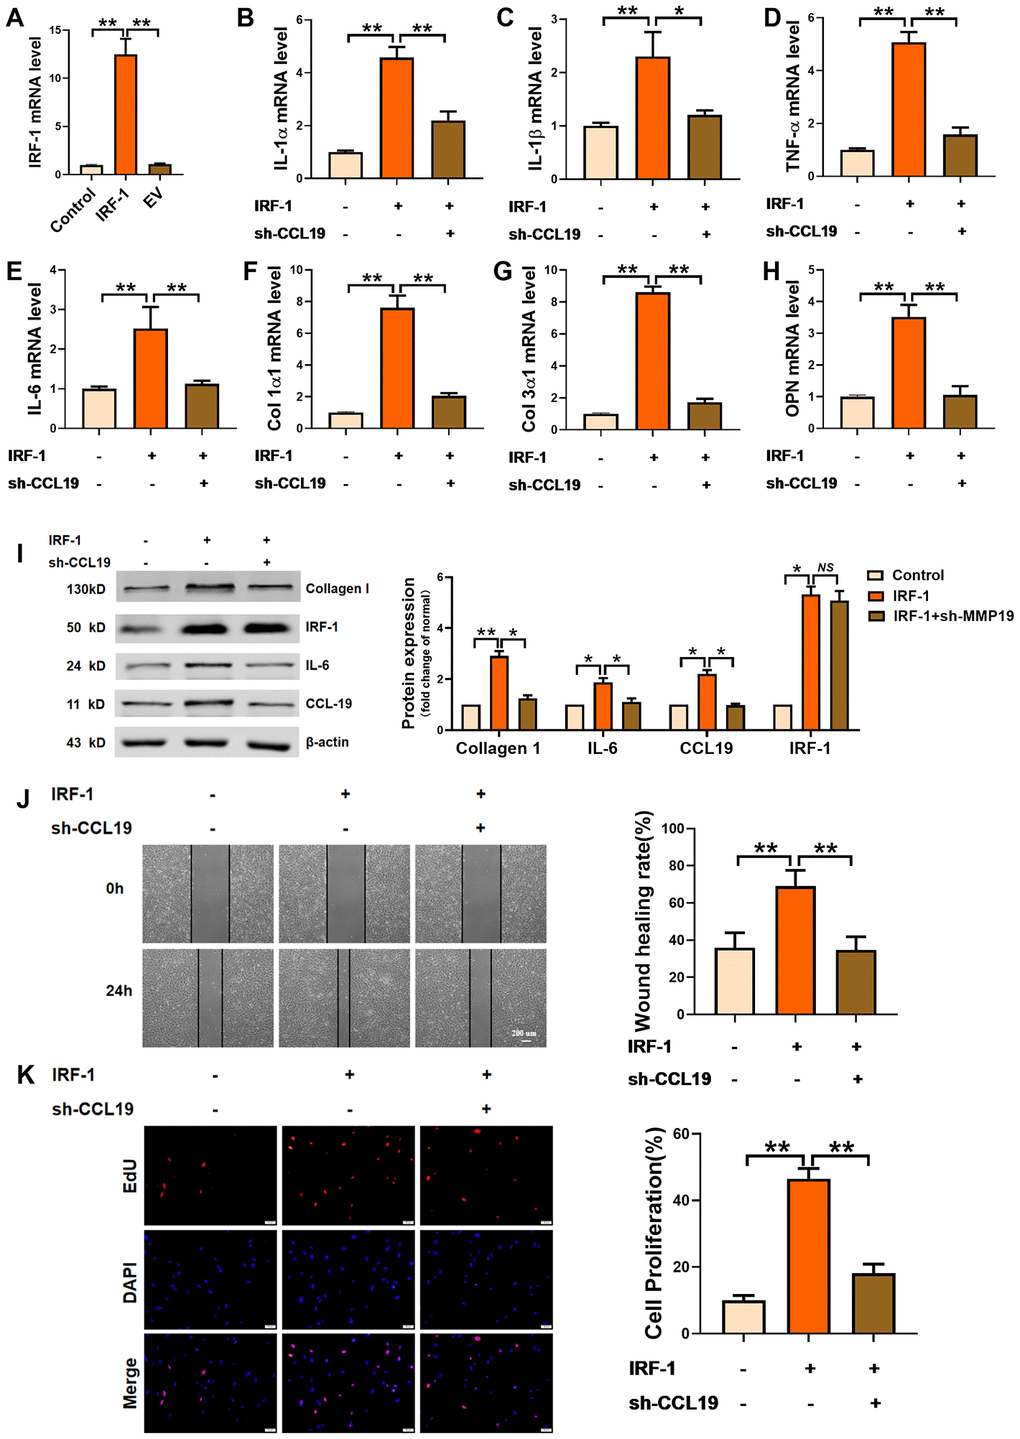 Effects of IRF-1 on VSMCS though CCL19. (A) Detection of overexpression efficiency of IRF-1 plasmid by qRT-PCR. n=5. Knockdown CCL19 reversed IRF-1 induced mRNA expression of inflammatory cytokine IL1-α (B), IL-1β (C), TNF-α (D), IL-6 (E) and the deposition of ECM collagen1 (F), collagen3 (G) and OPN. (H, I) Western blot showed the collagen1, IL-6 and CCL19 protein expression induced by IRF-1, but reduced by sh-CCL19. n = 4. Migration (J) and proliferation (K) of VSMCS of IRF-1 overexpression, with or without sh-CCL19. n = 6. *P